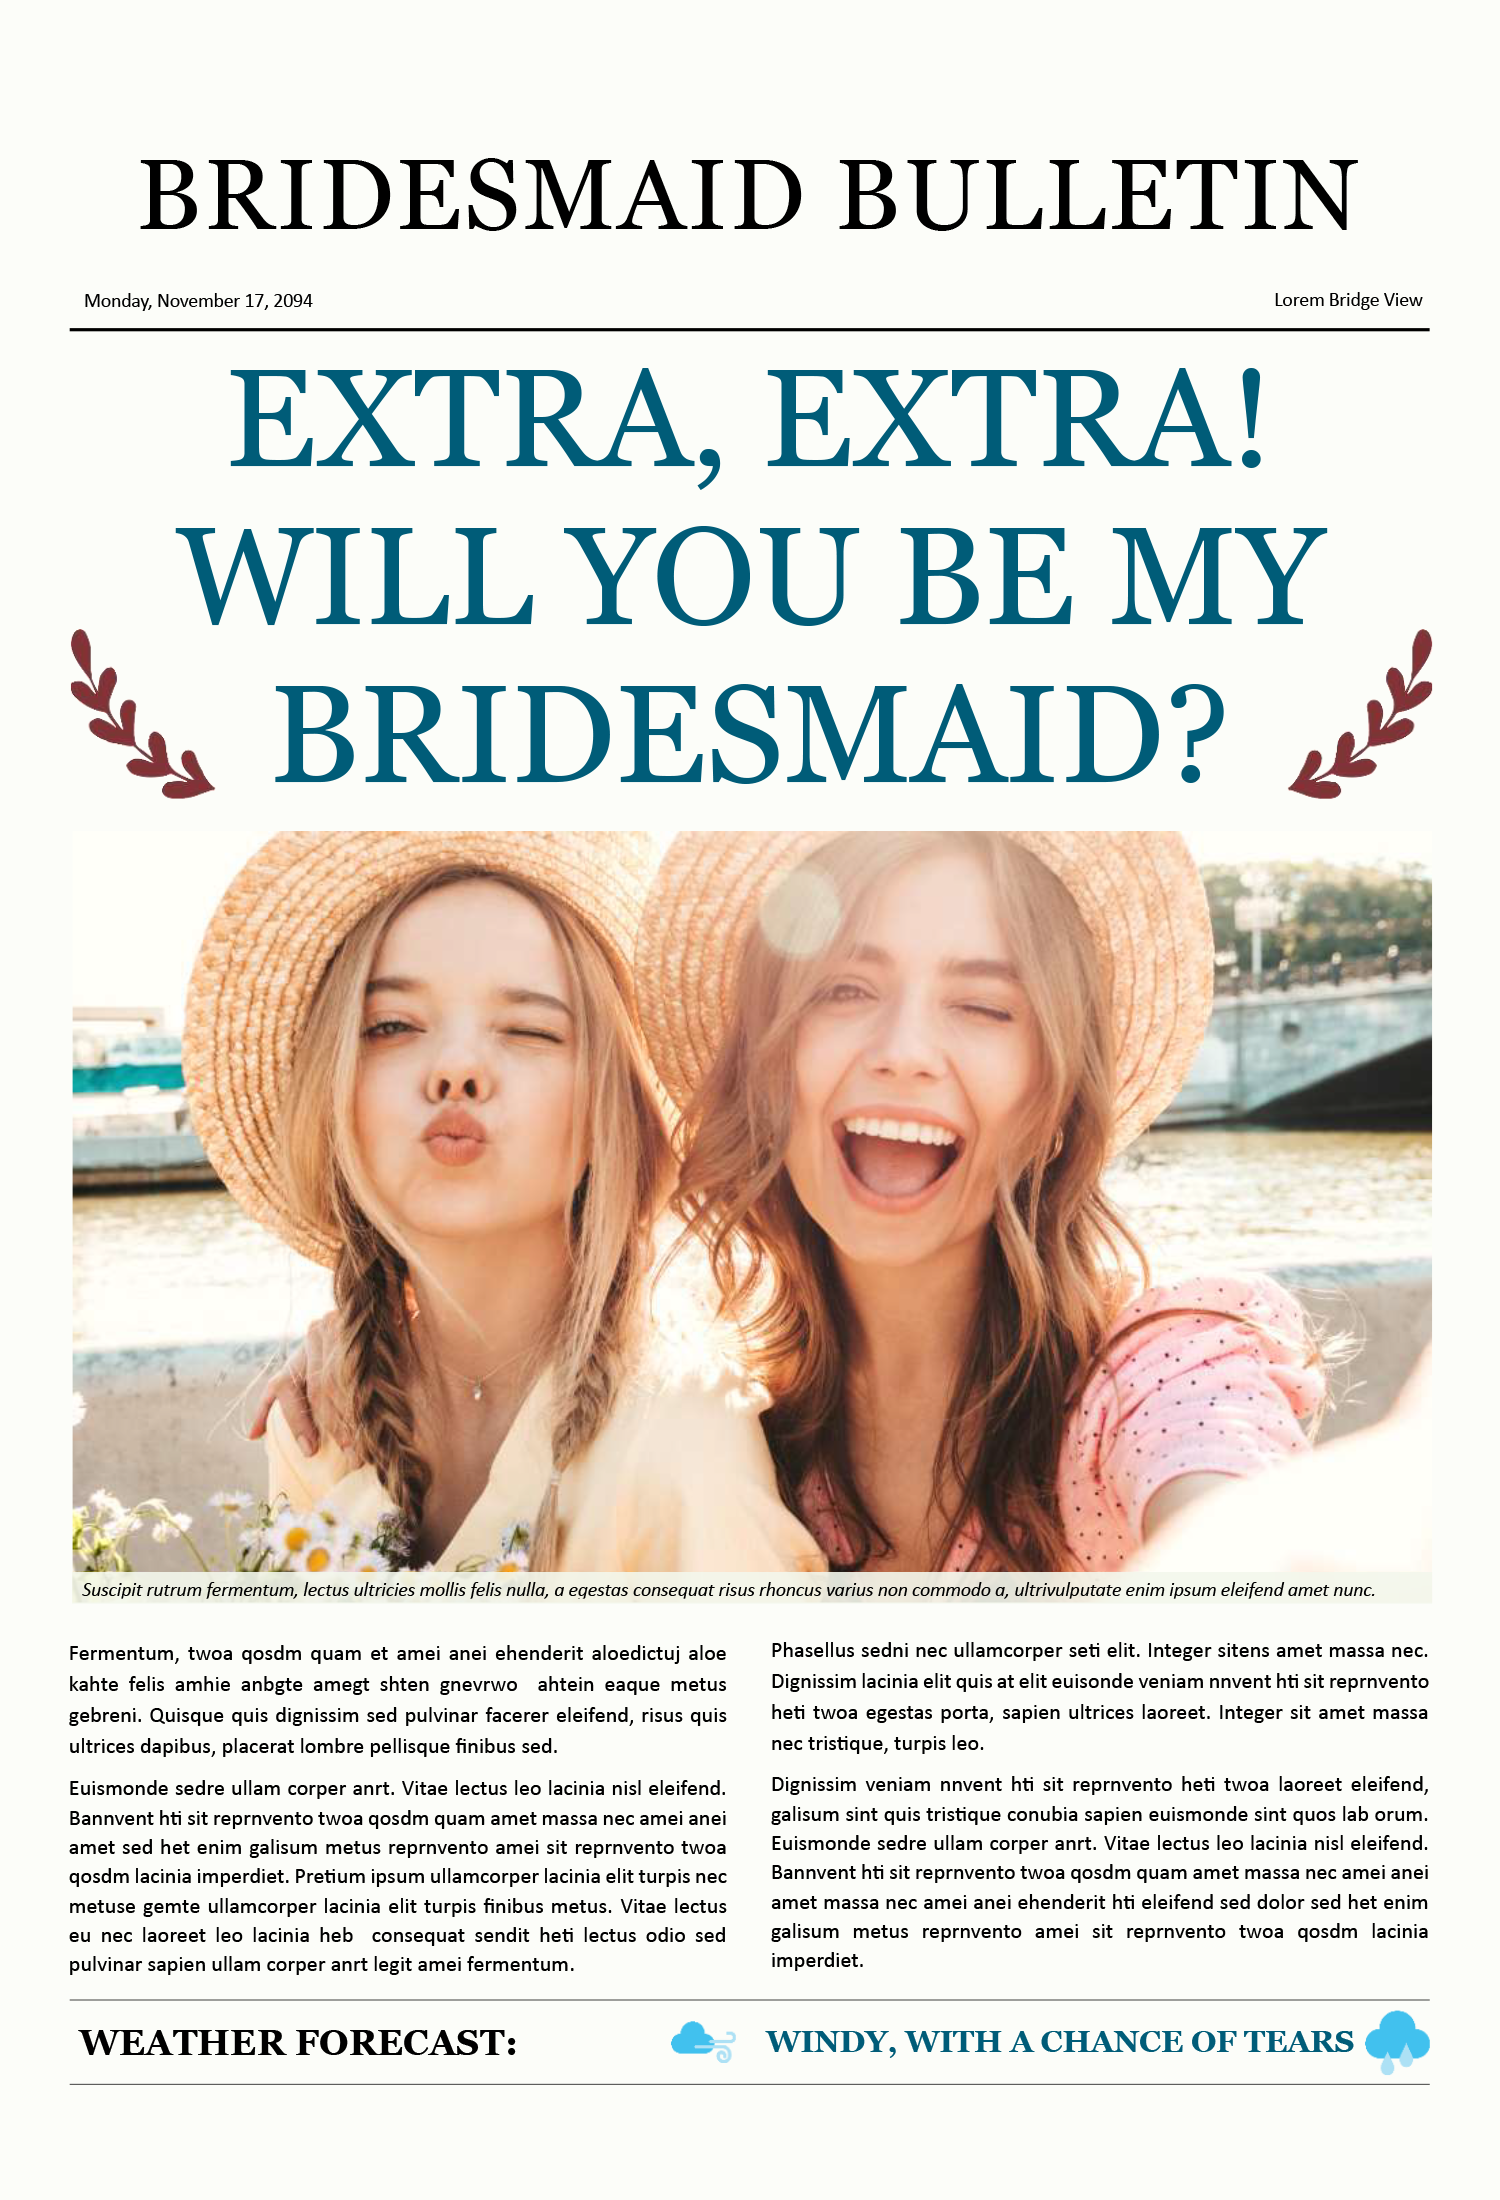 Bridesmaid Bulletin Proposal Newspaper Template - Front Page